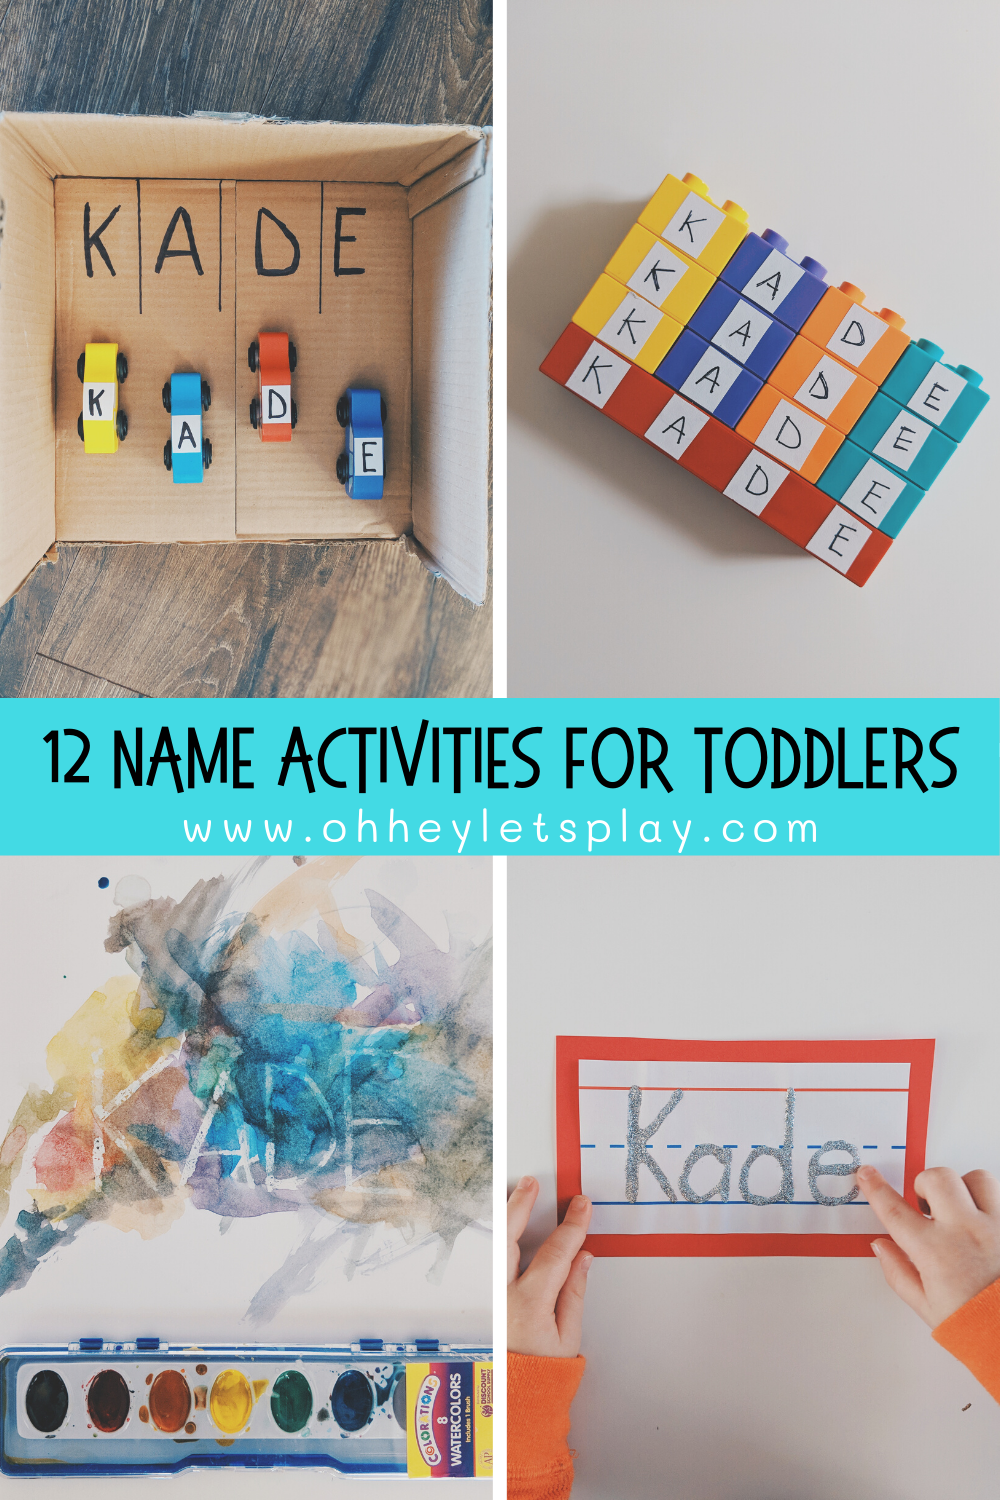 Name Activities for Toddlers